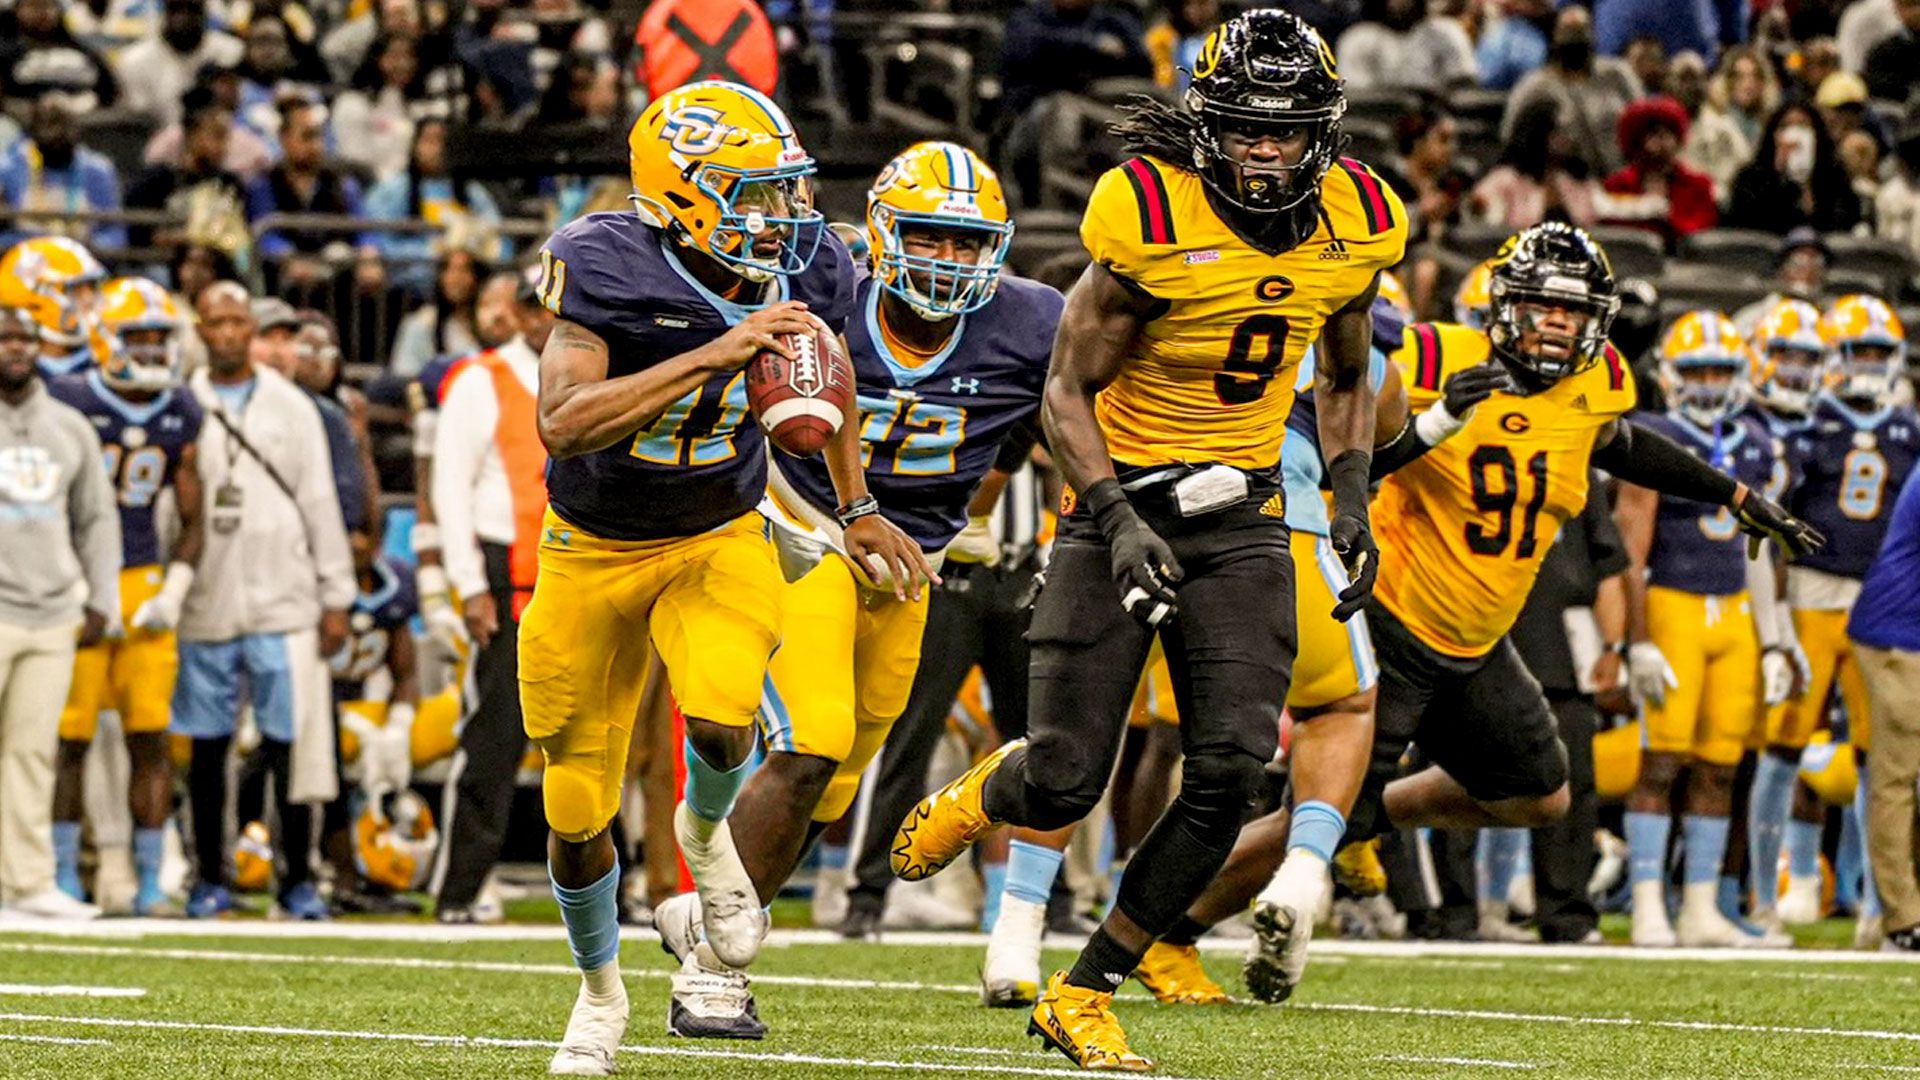 Southern overtakes Grambling and wins the Bayou Classic